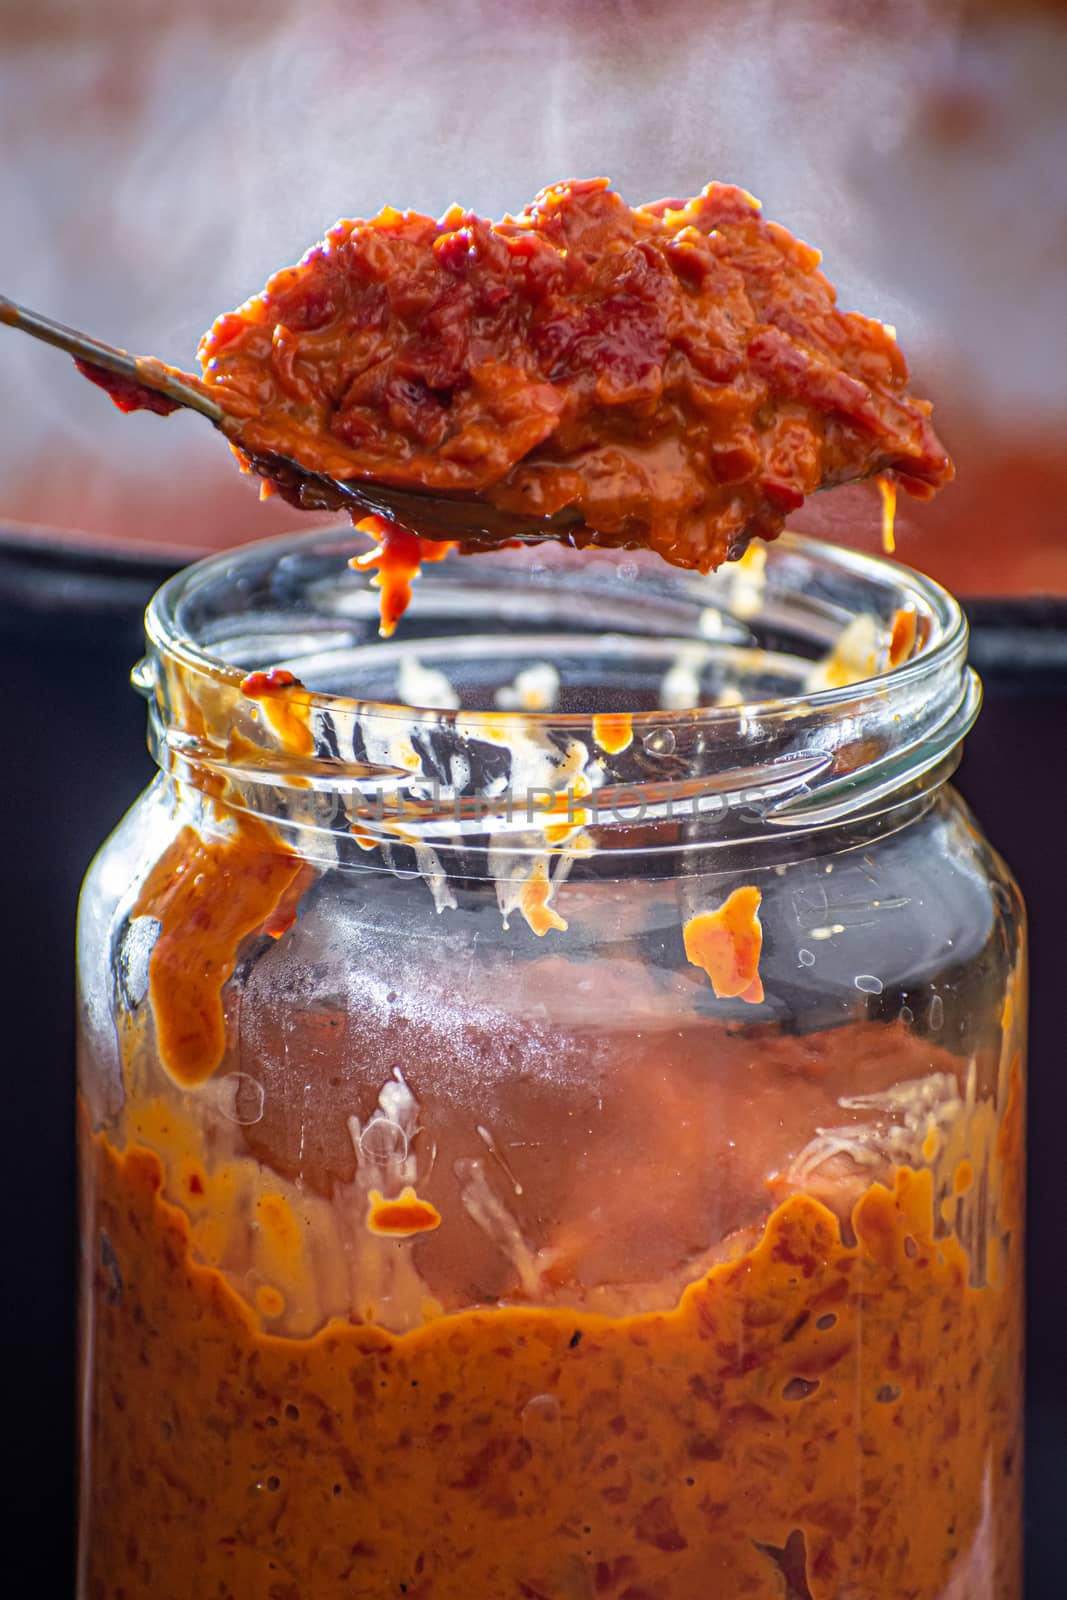 pouring fresly cooked ajvar into the jar with spoon